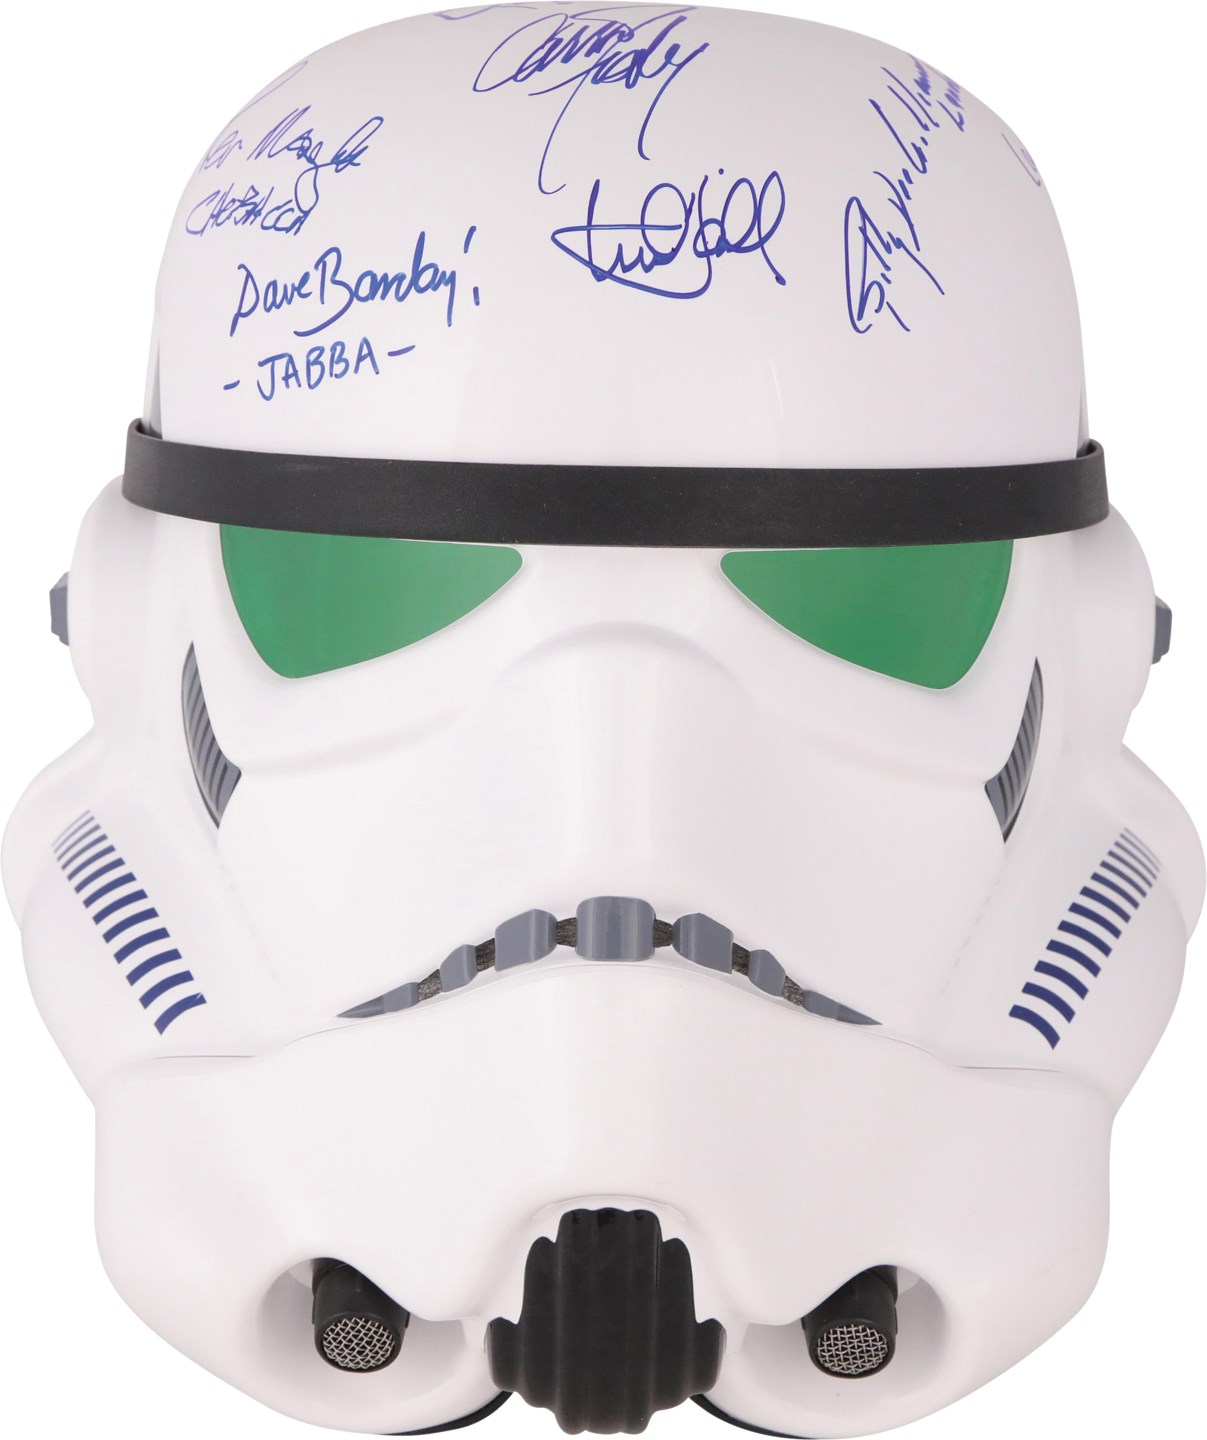 Rock And Pop Culture - Star Wars Multi-Signed Stormtrooper Helmet w/Harrison Ford, Carrie Fisher, Mark Hamill, & 22 others (Beckett LOA)